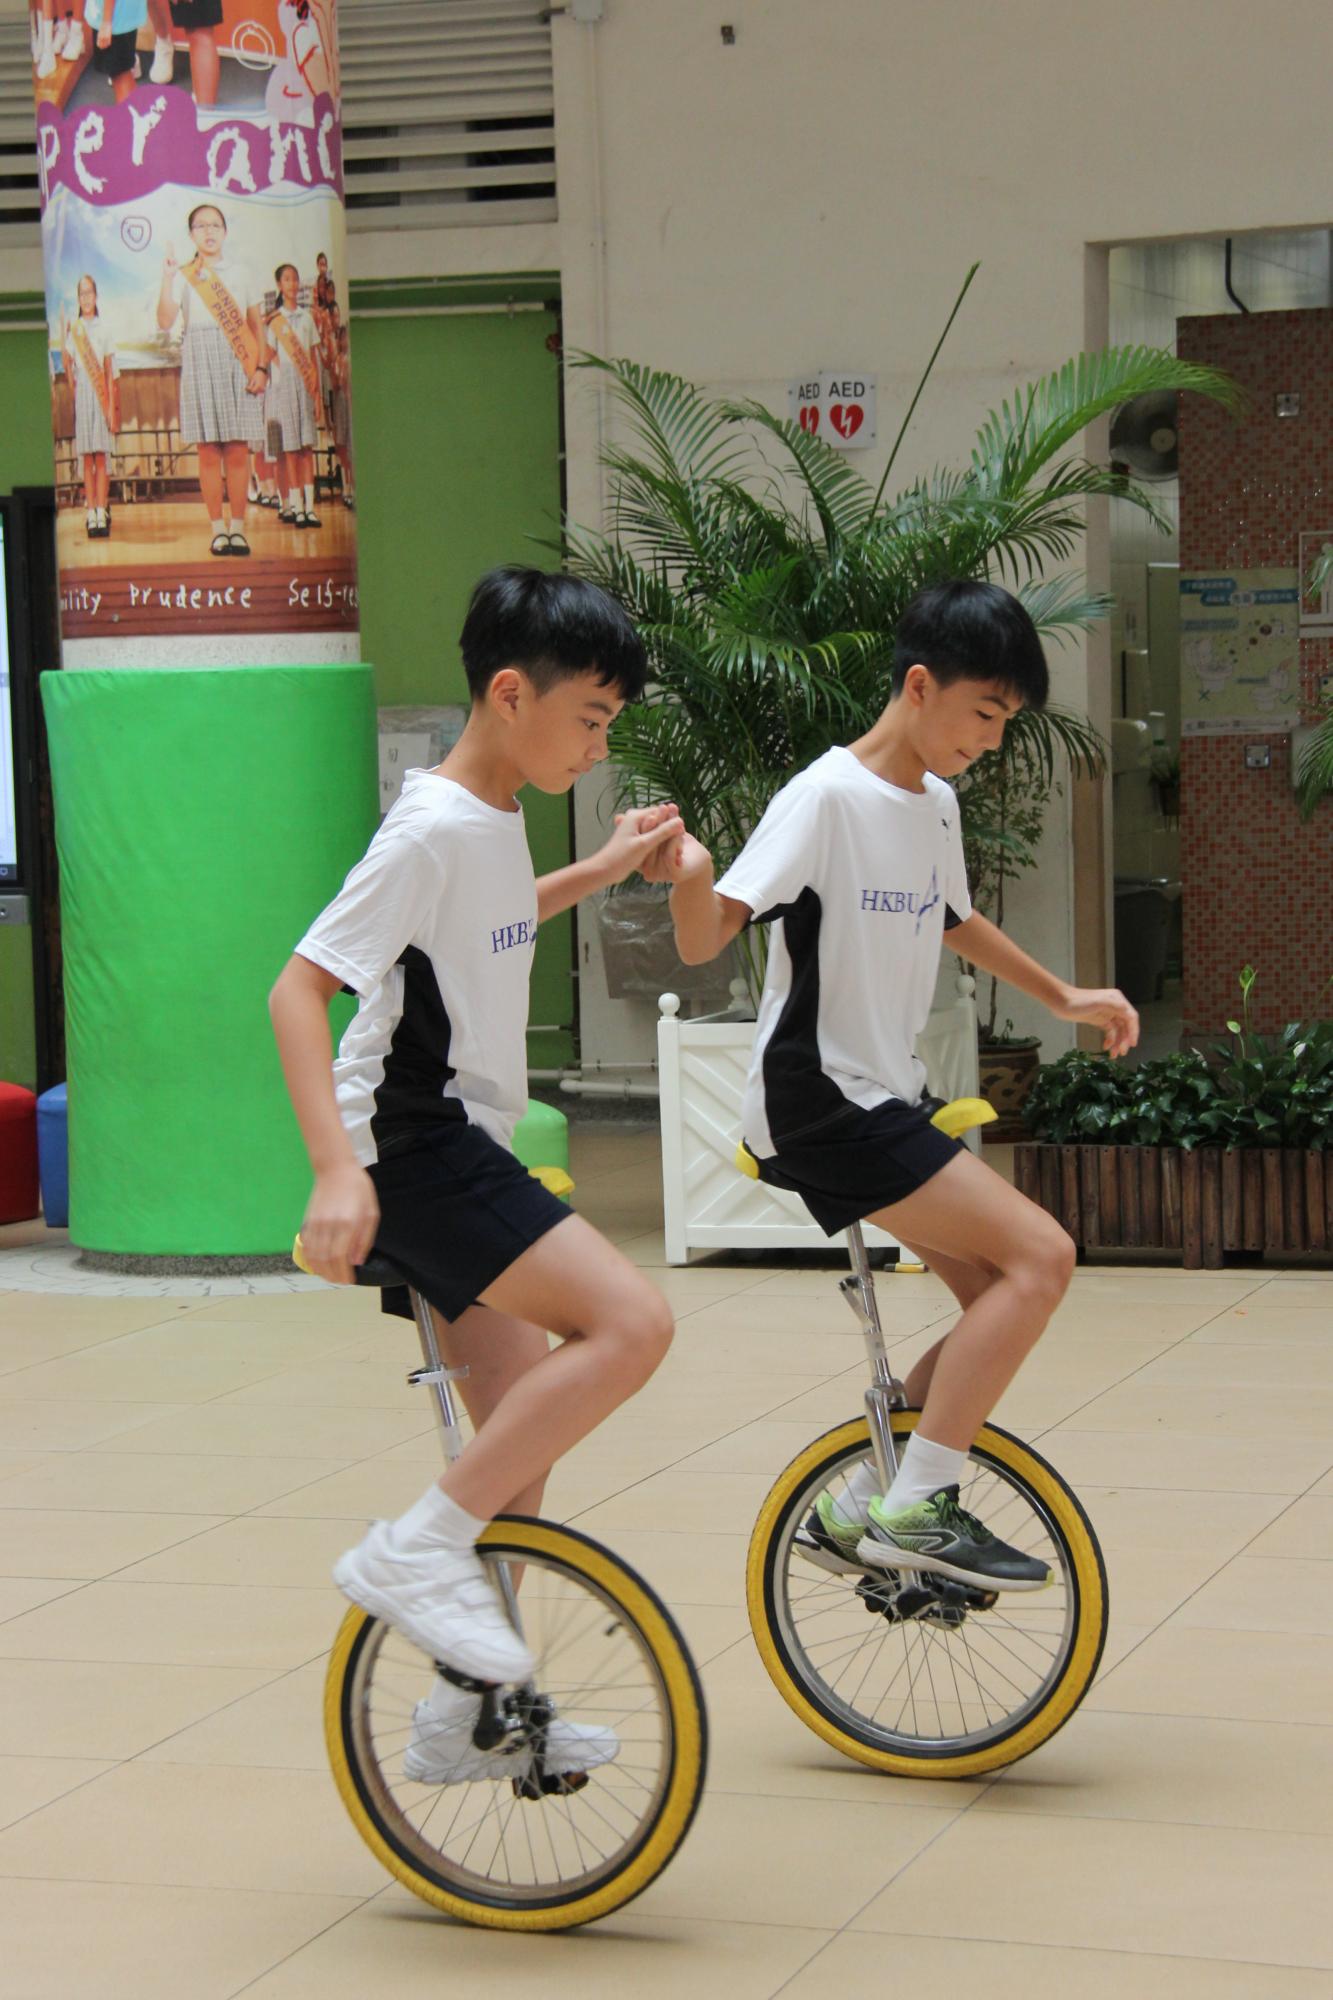 Unicycling Performance by students